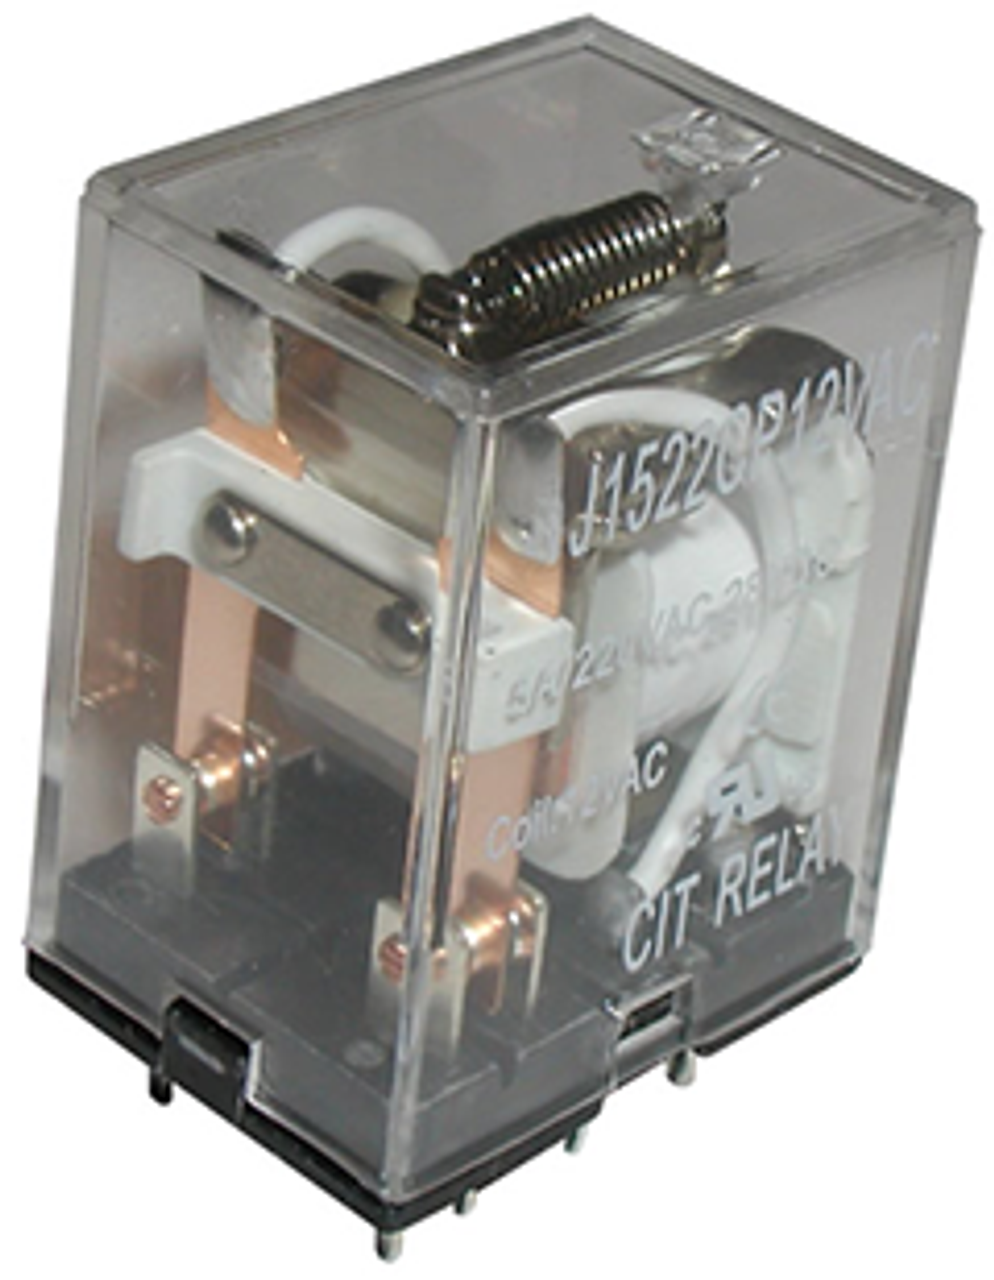 CIT Relay and Switch J1522CP220VACD Industrial Relays